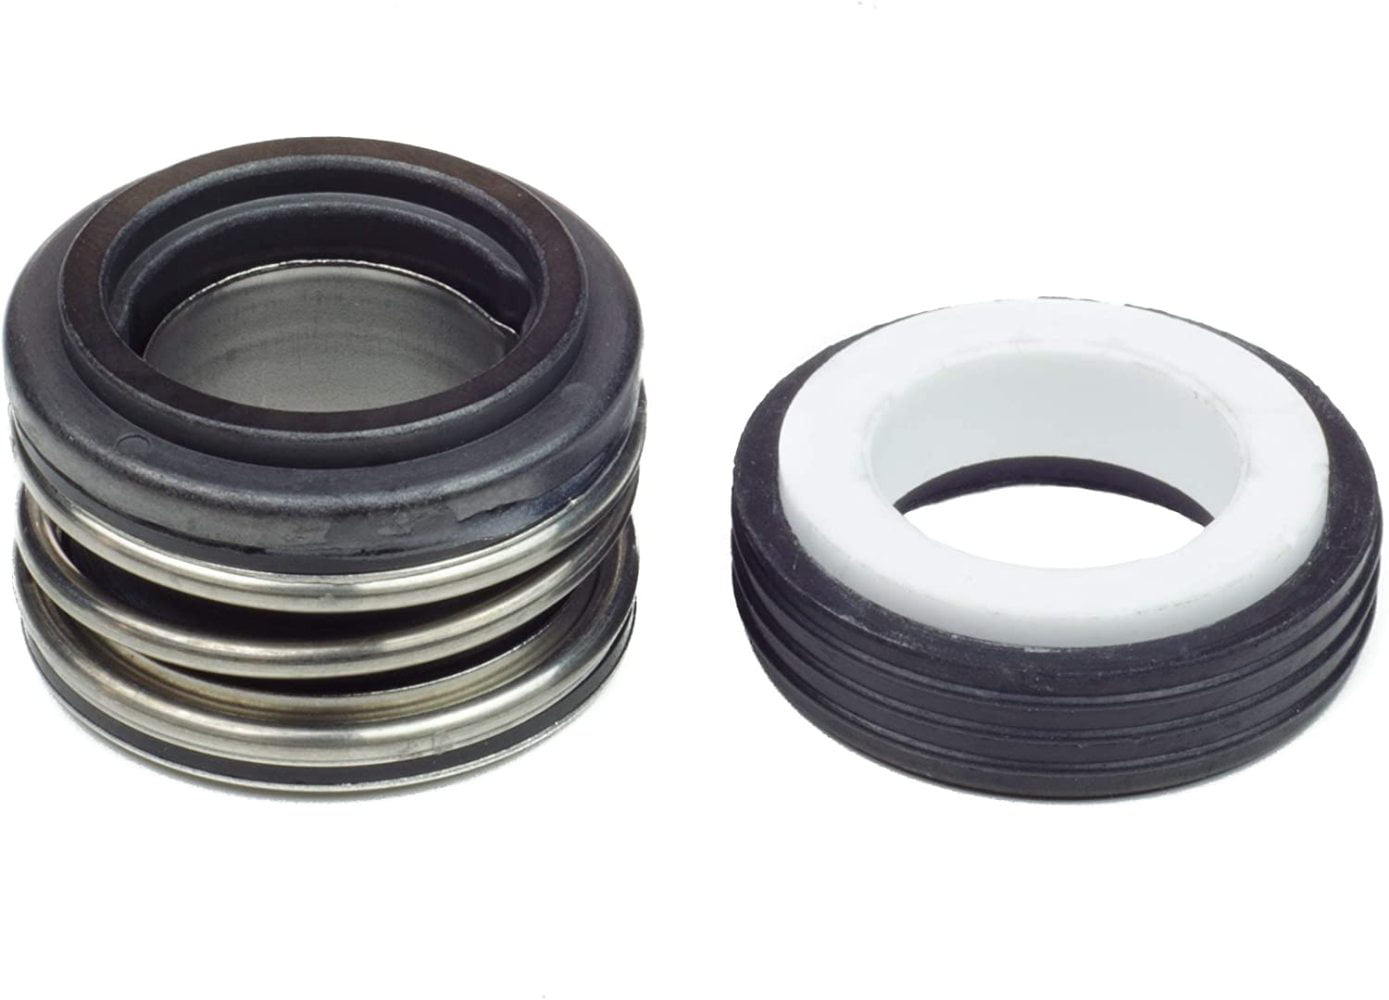 All 3 Gaskets & Shaft Seal Hayward Super Pump Seal O-ring Replacement Go Kit 3 